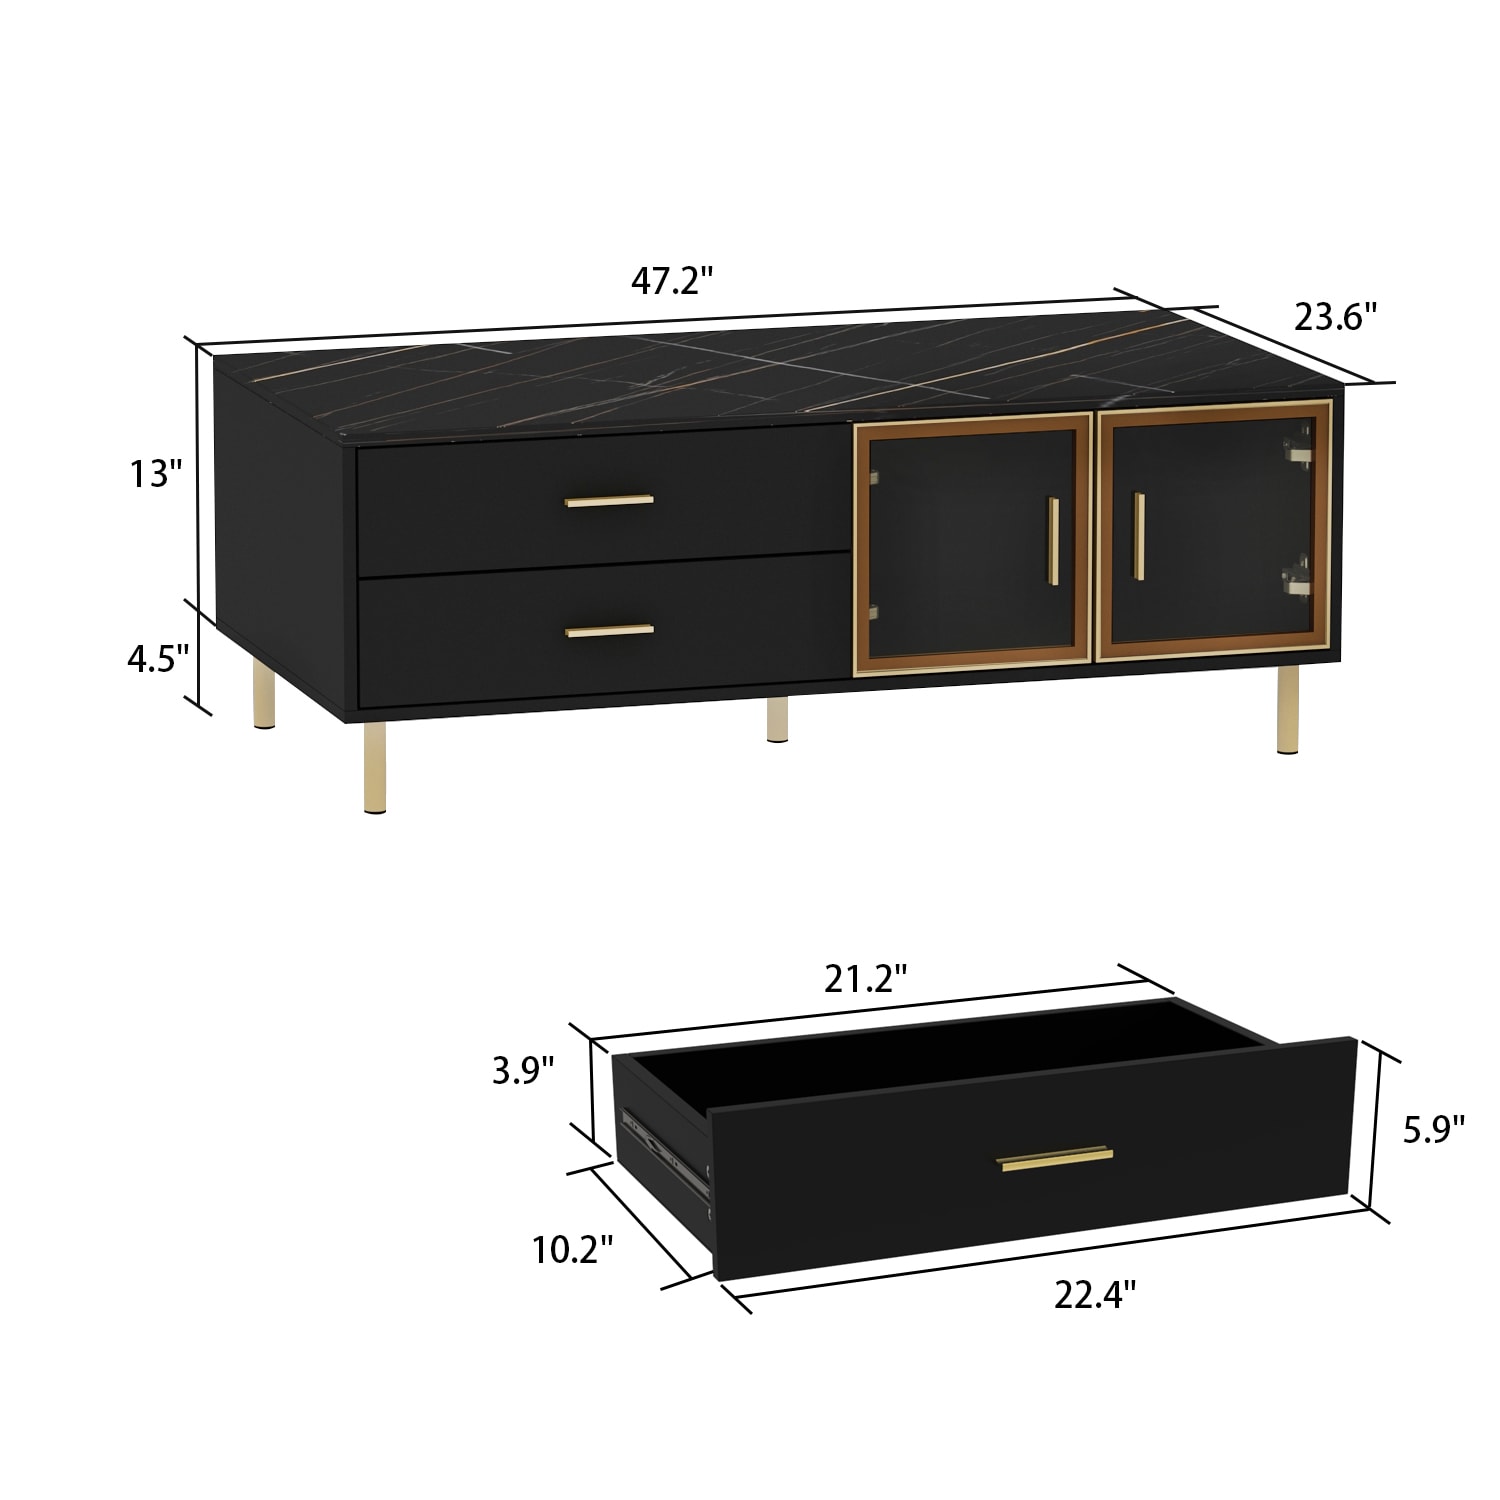 FUFU&GAGA Coffee Table With 2 Drawers at Lowes.com